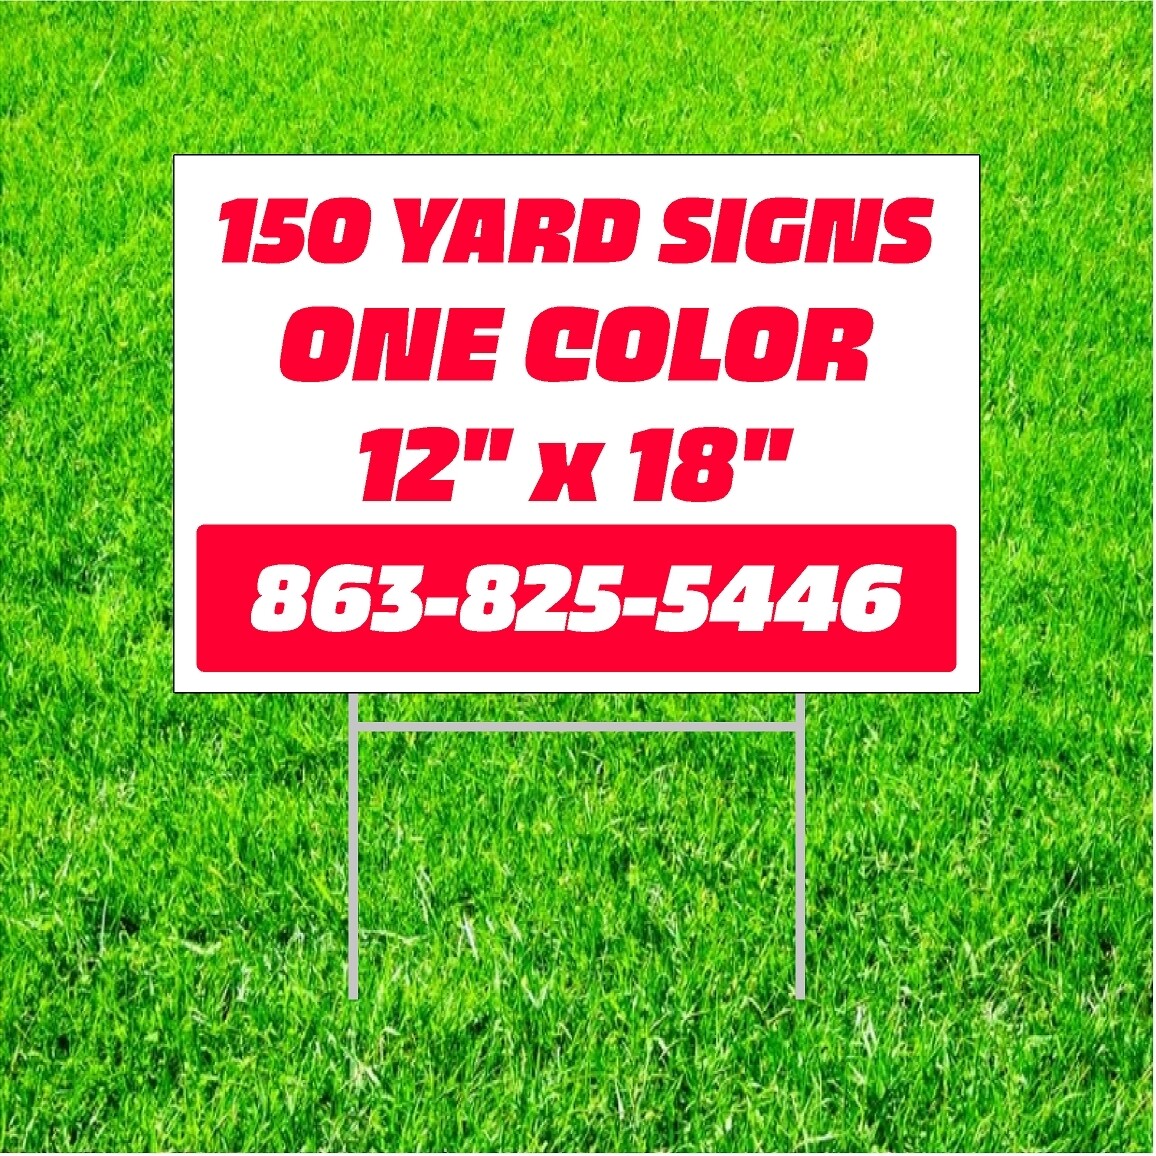 QTY 150 - 12 x 18 Yard Signs / 1 COLOR / 1 SIDE